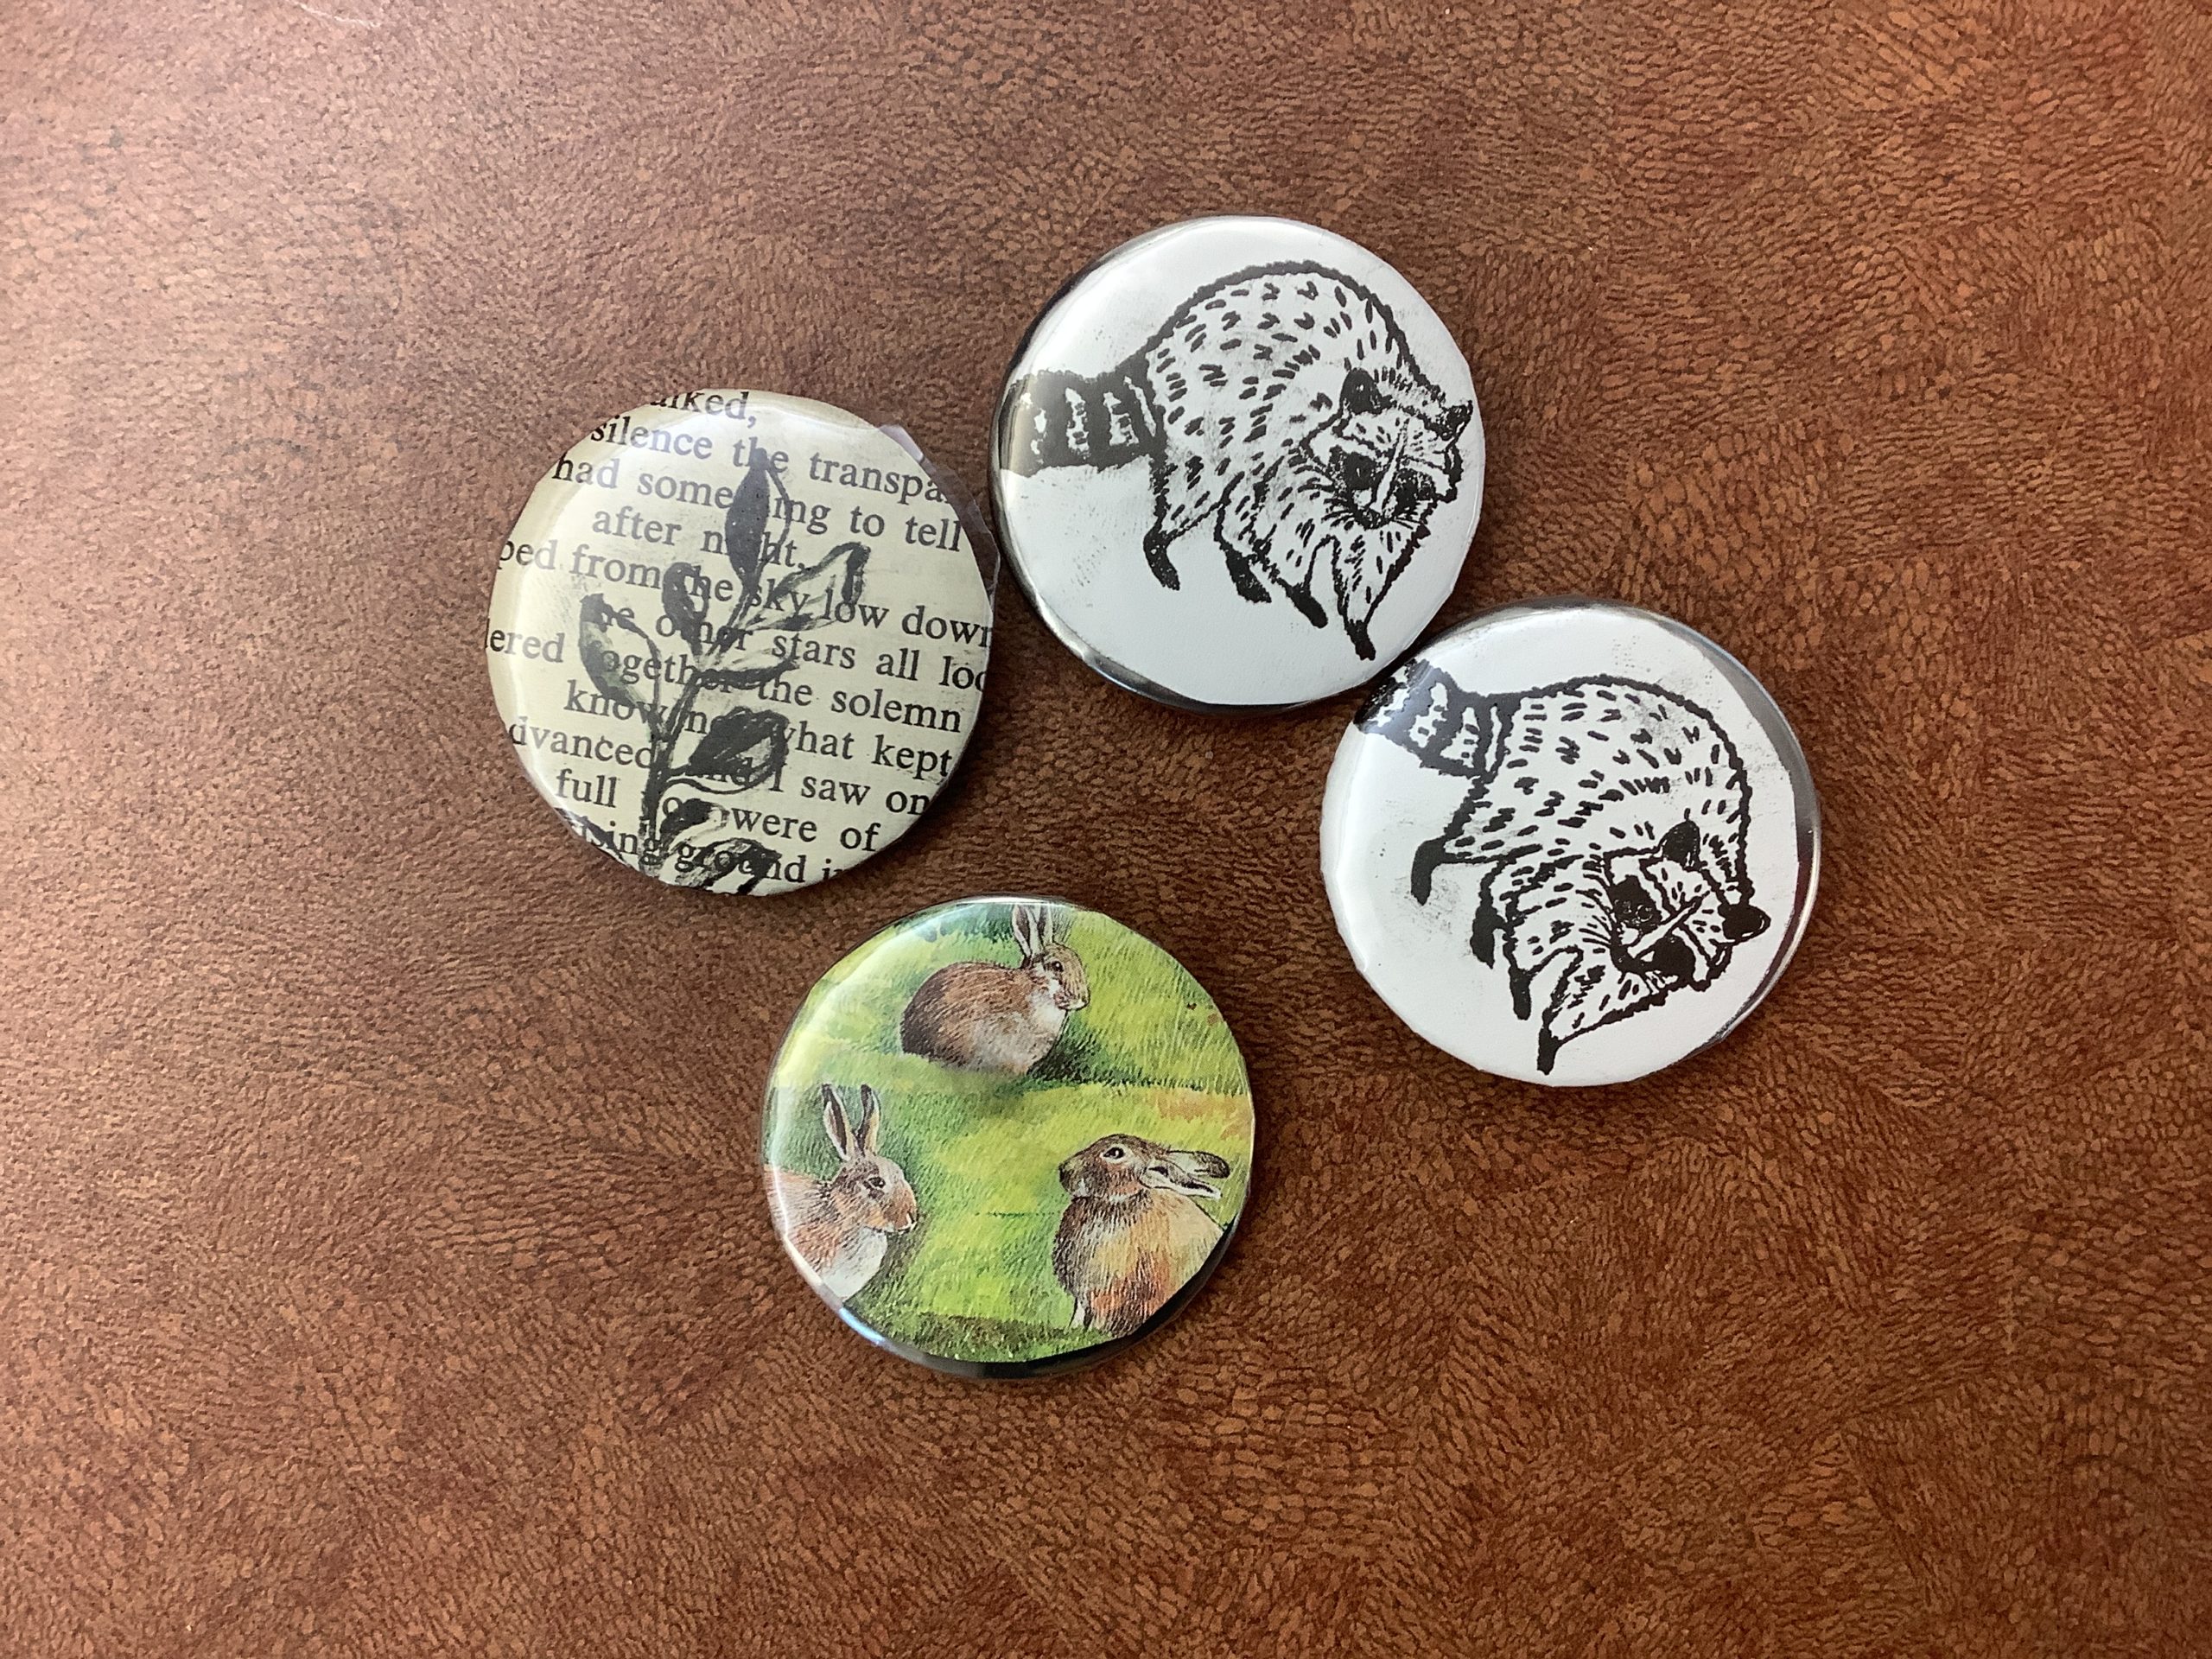 A few buttons that students have made in Makerspace